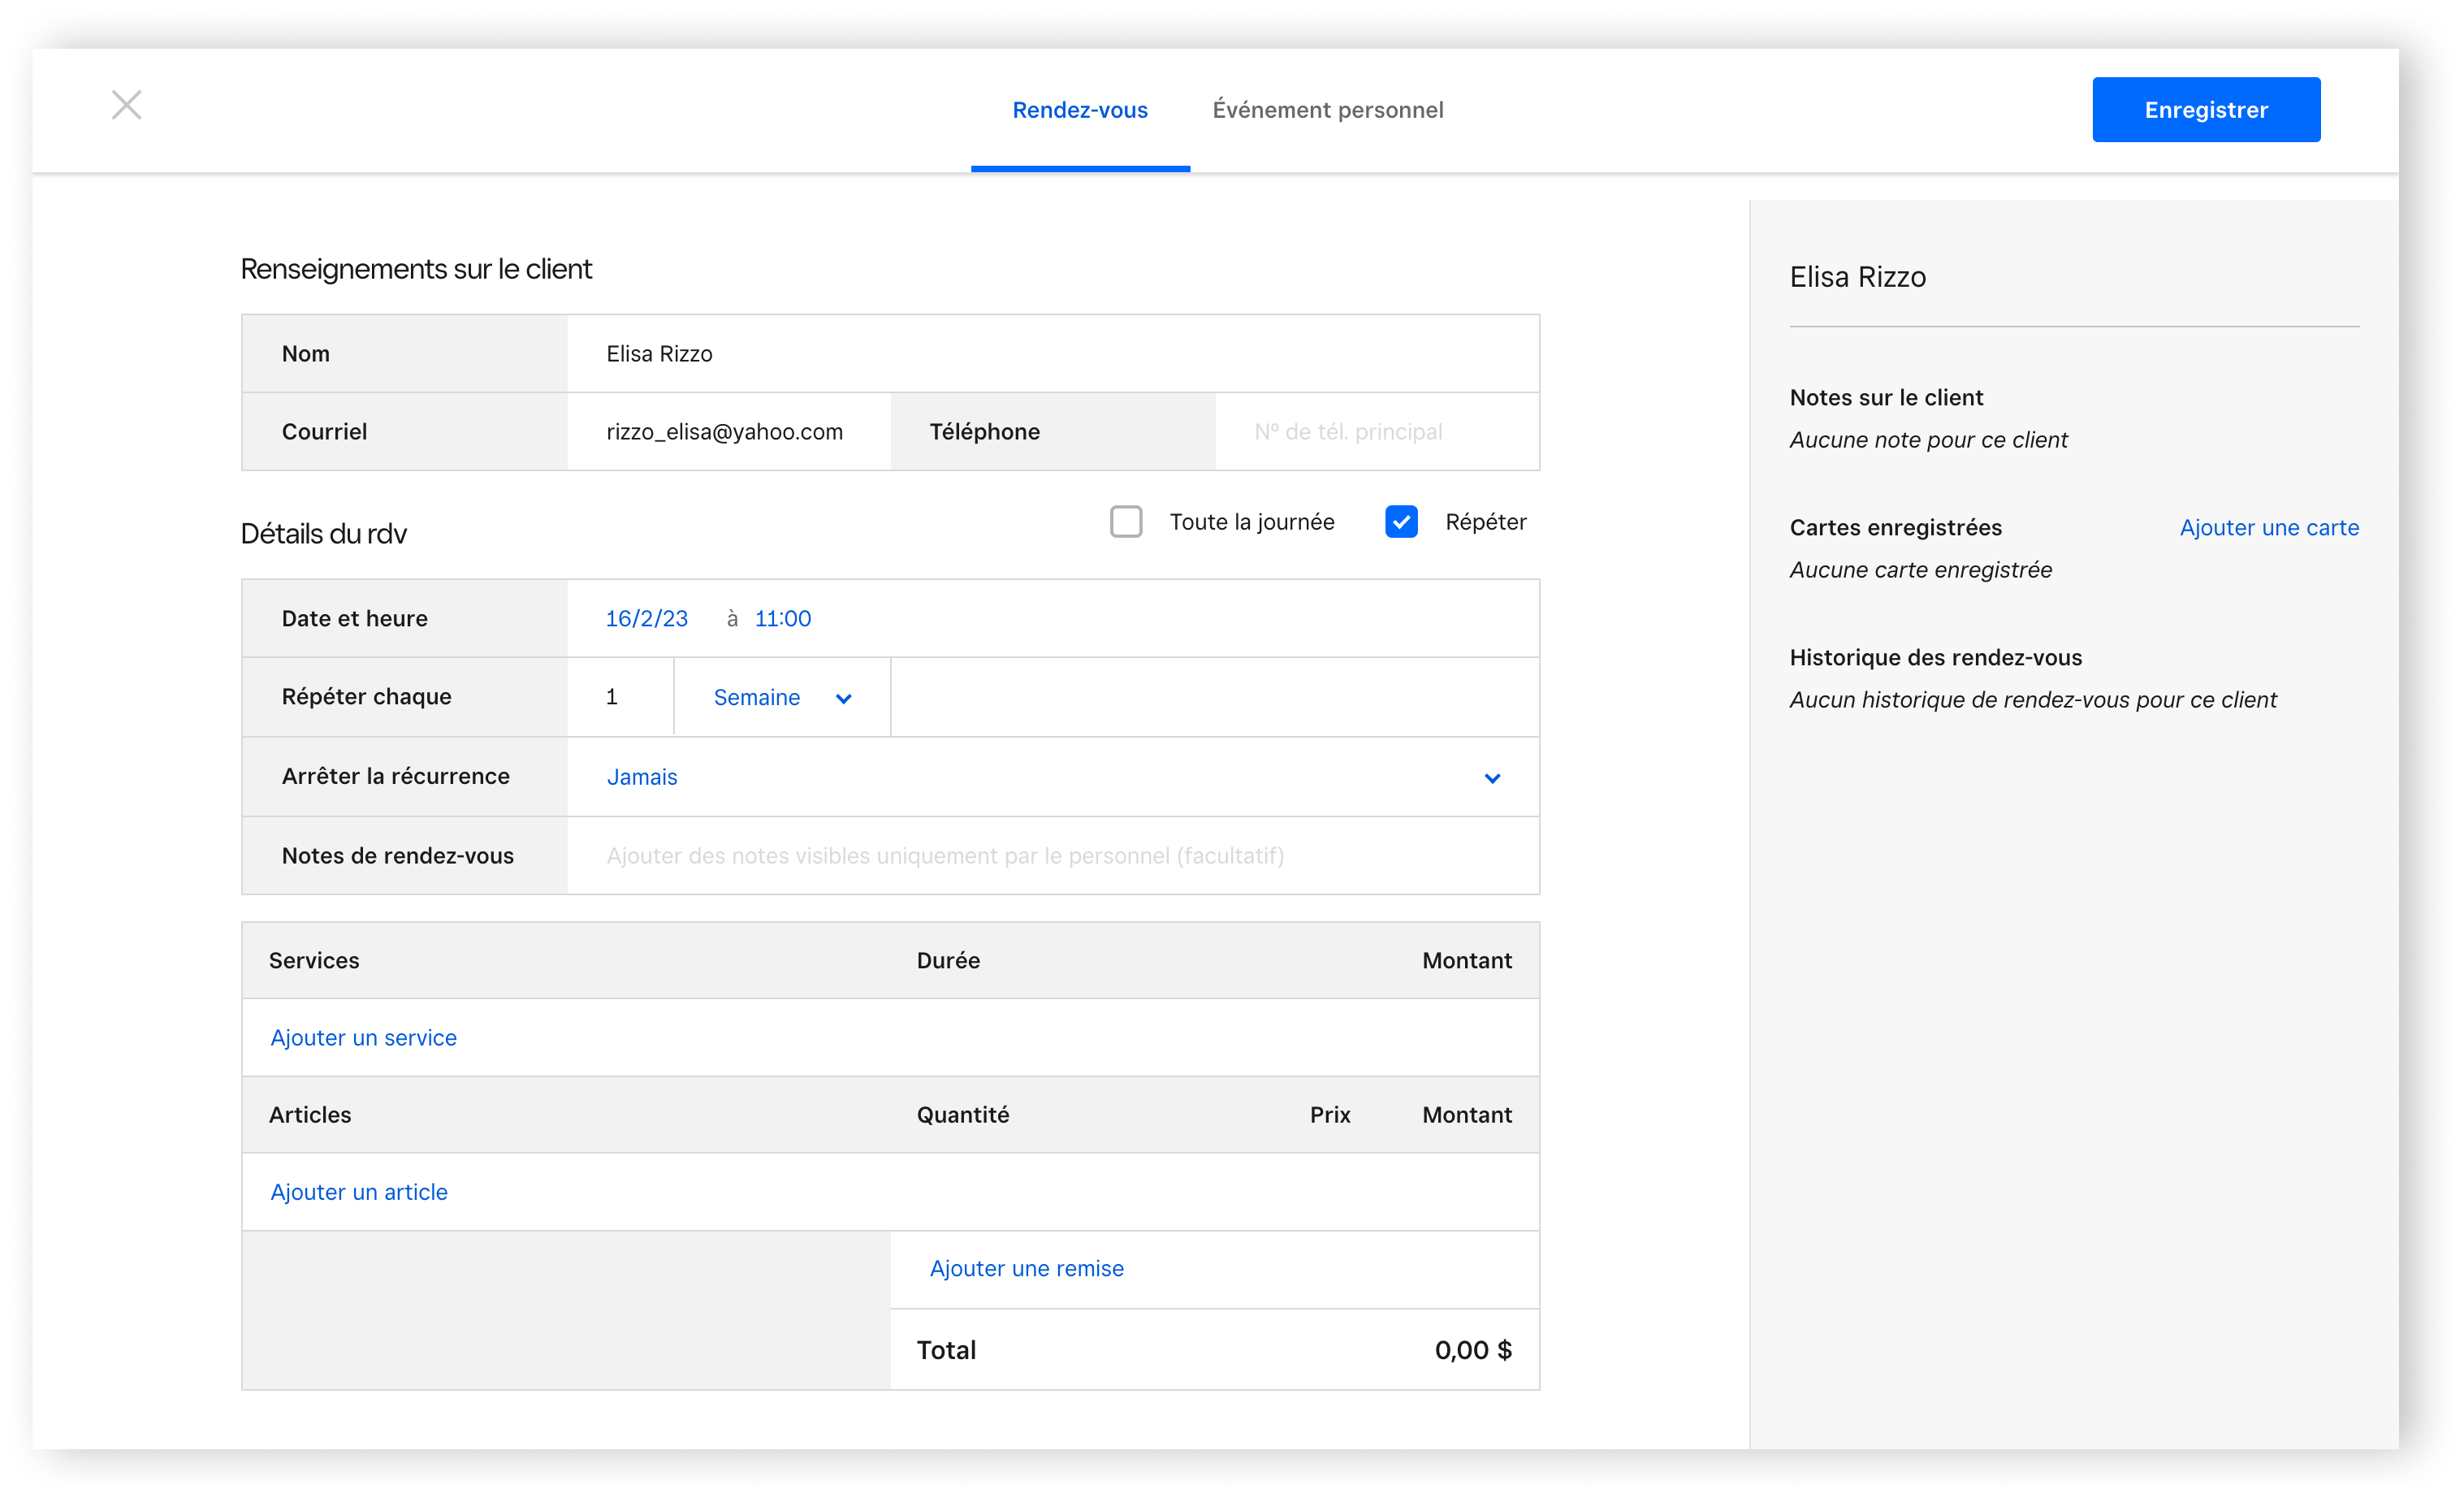 The schedule appointment view in your dashboard contains information on the client, appointment notes and time, staff, and services offered.